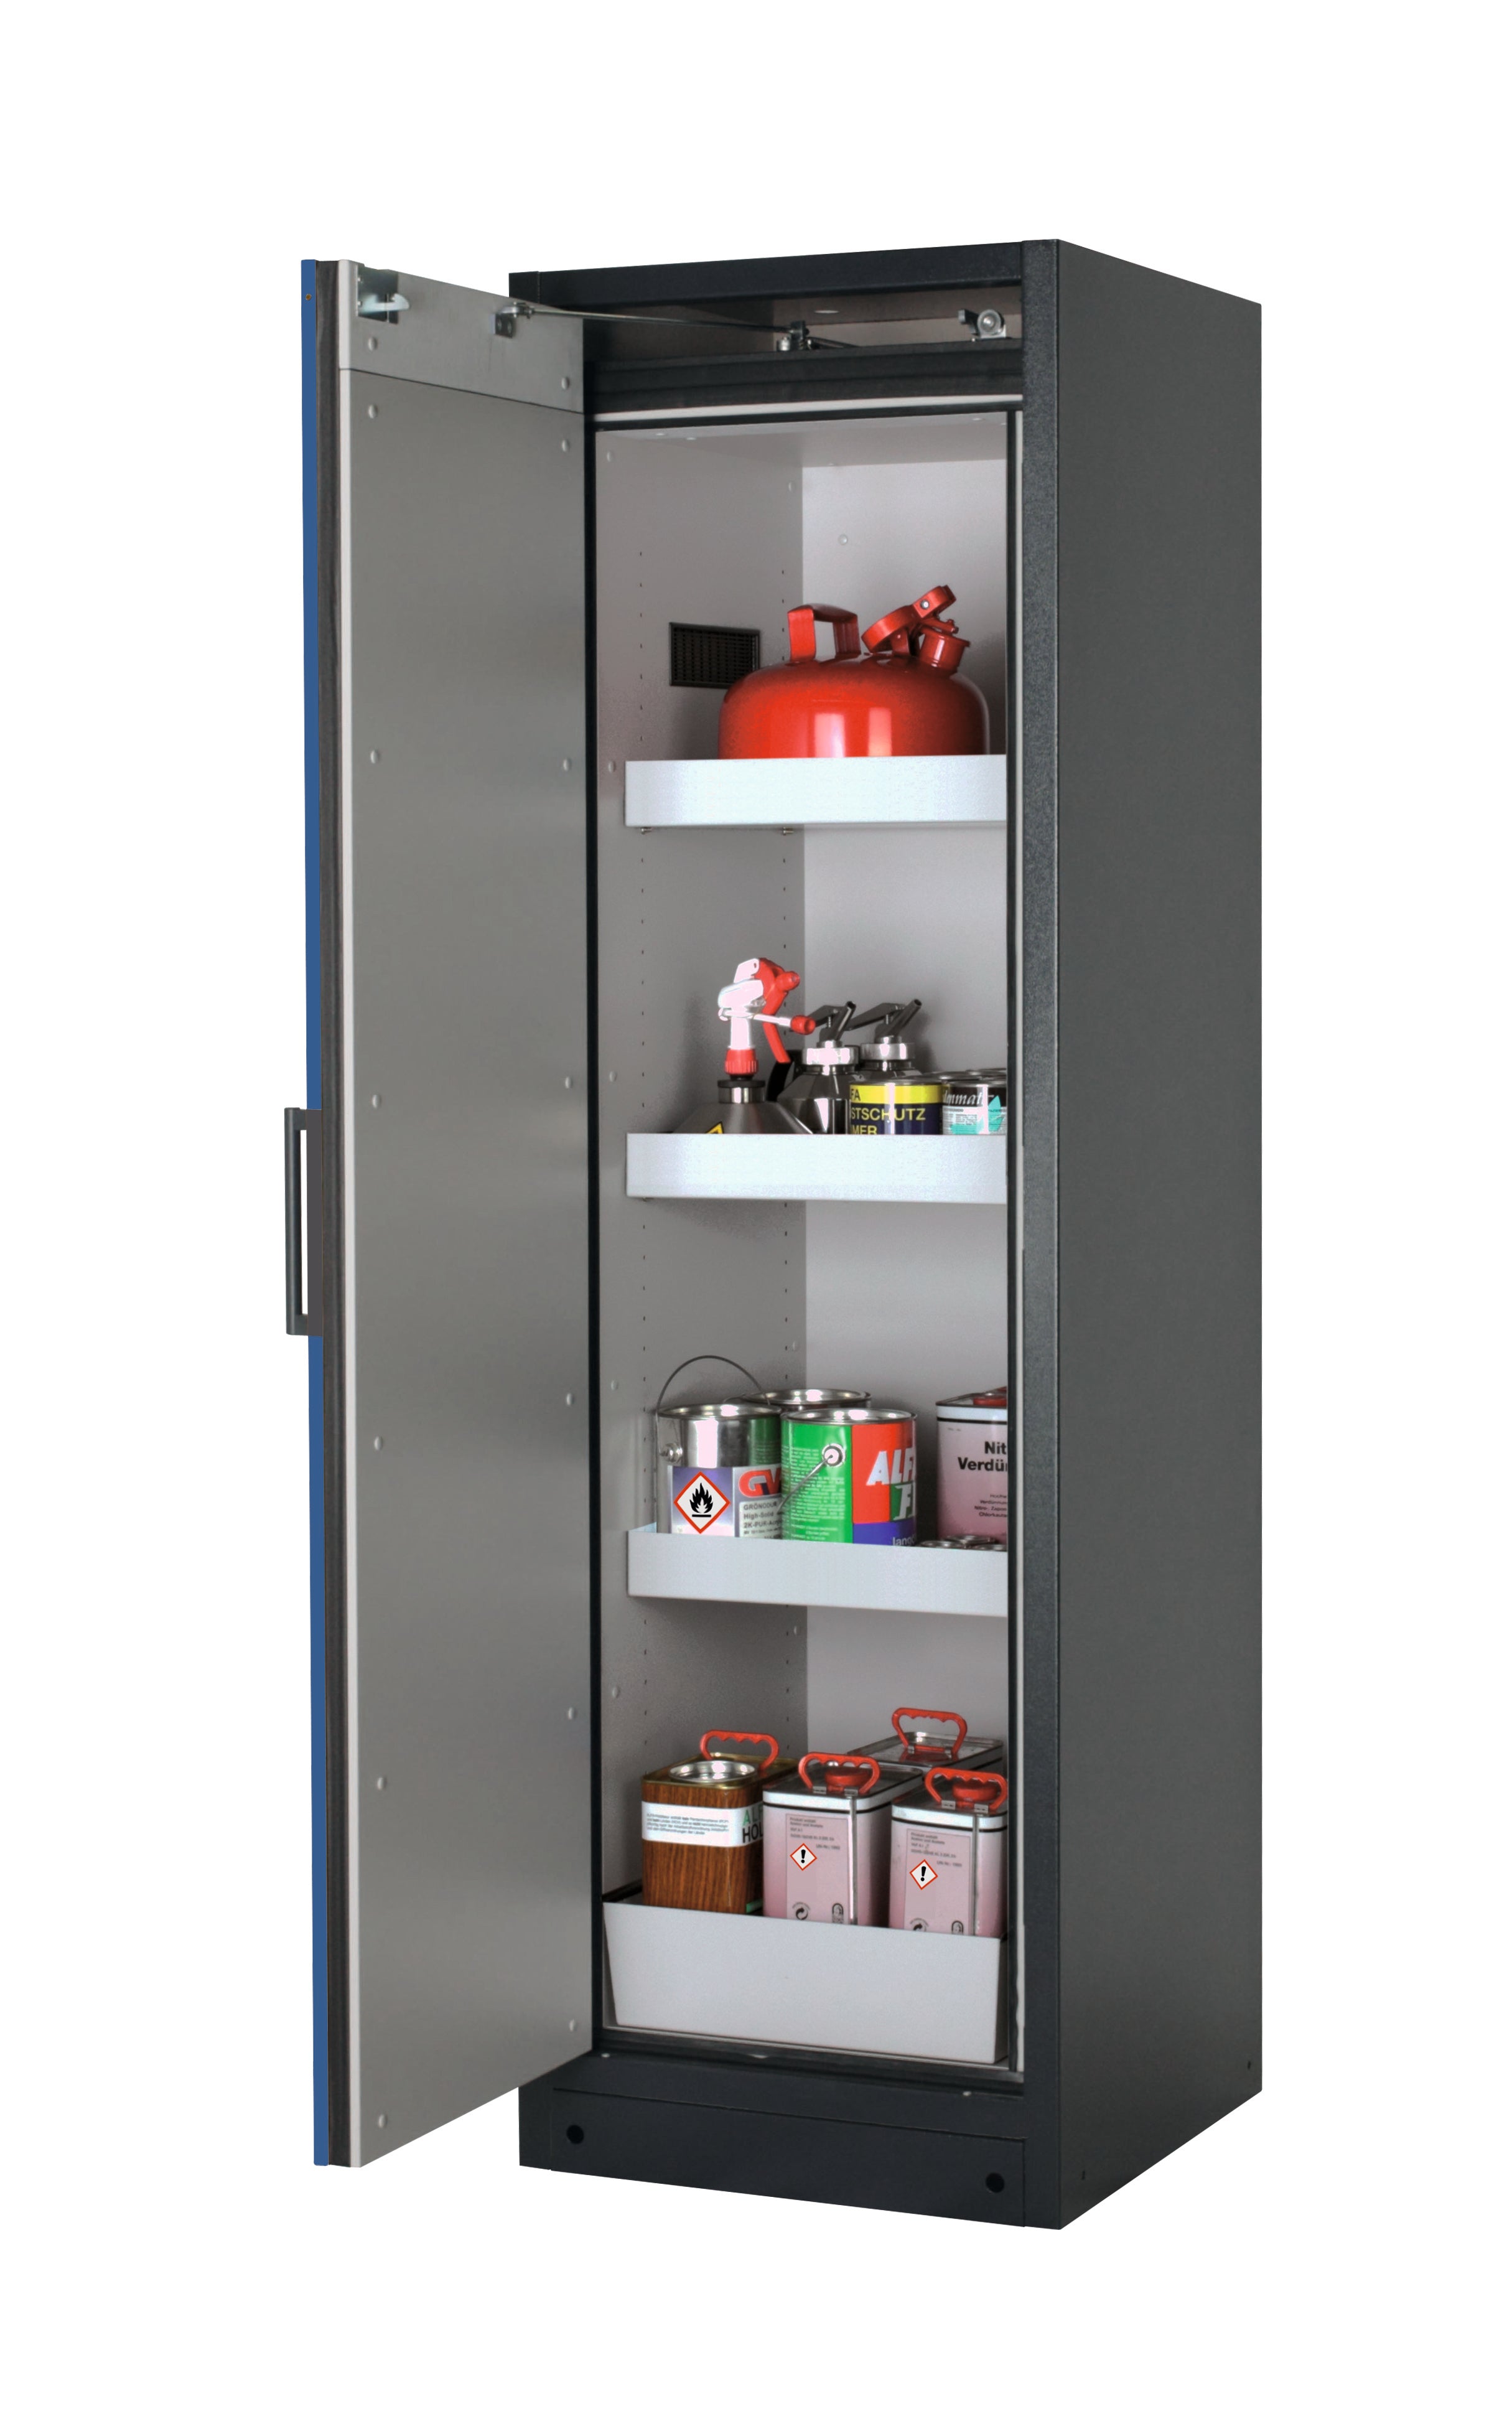 Type 90 safety storage cabinet Q-CLASSIC-90 model Q90.195.060 in gentian blue RAL 5010 with 3x tray shelf (standard) (sheet steel),